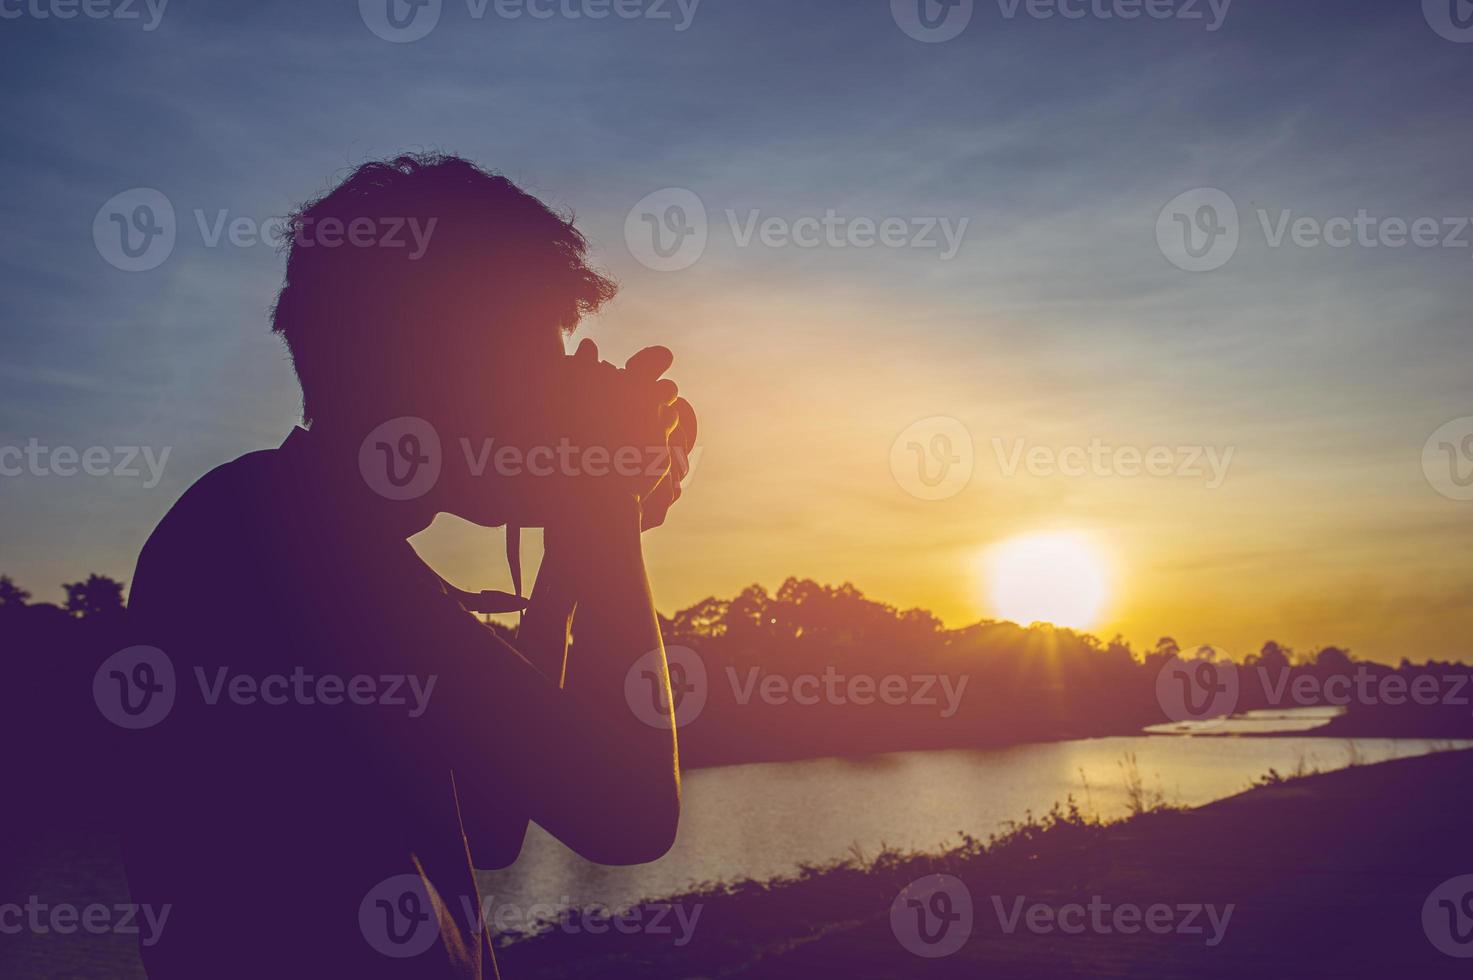 Silhouette, photographer, photo in shadow, silhouette concept